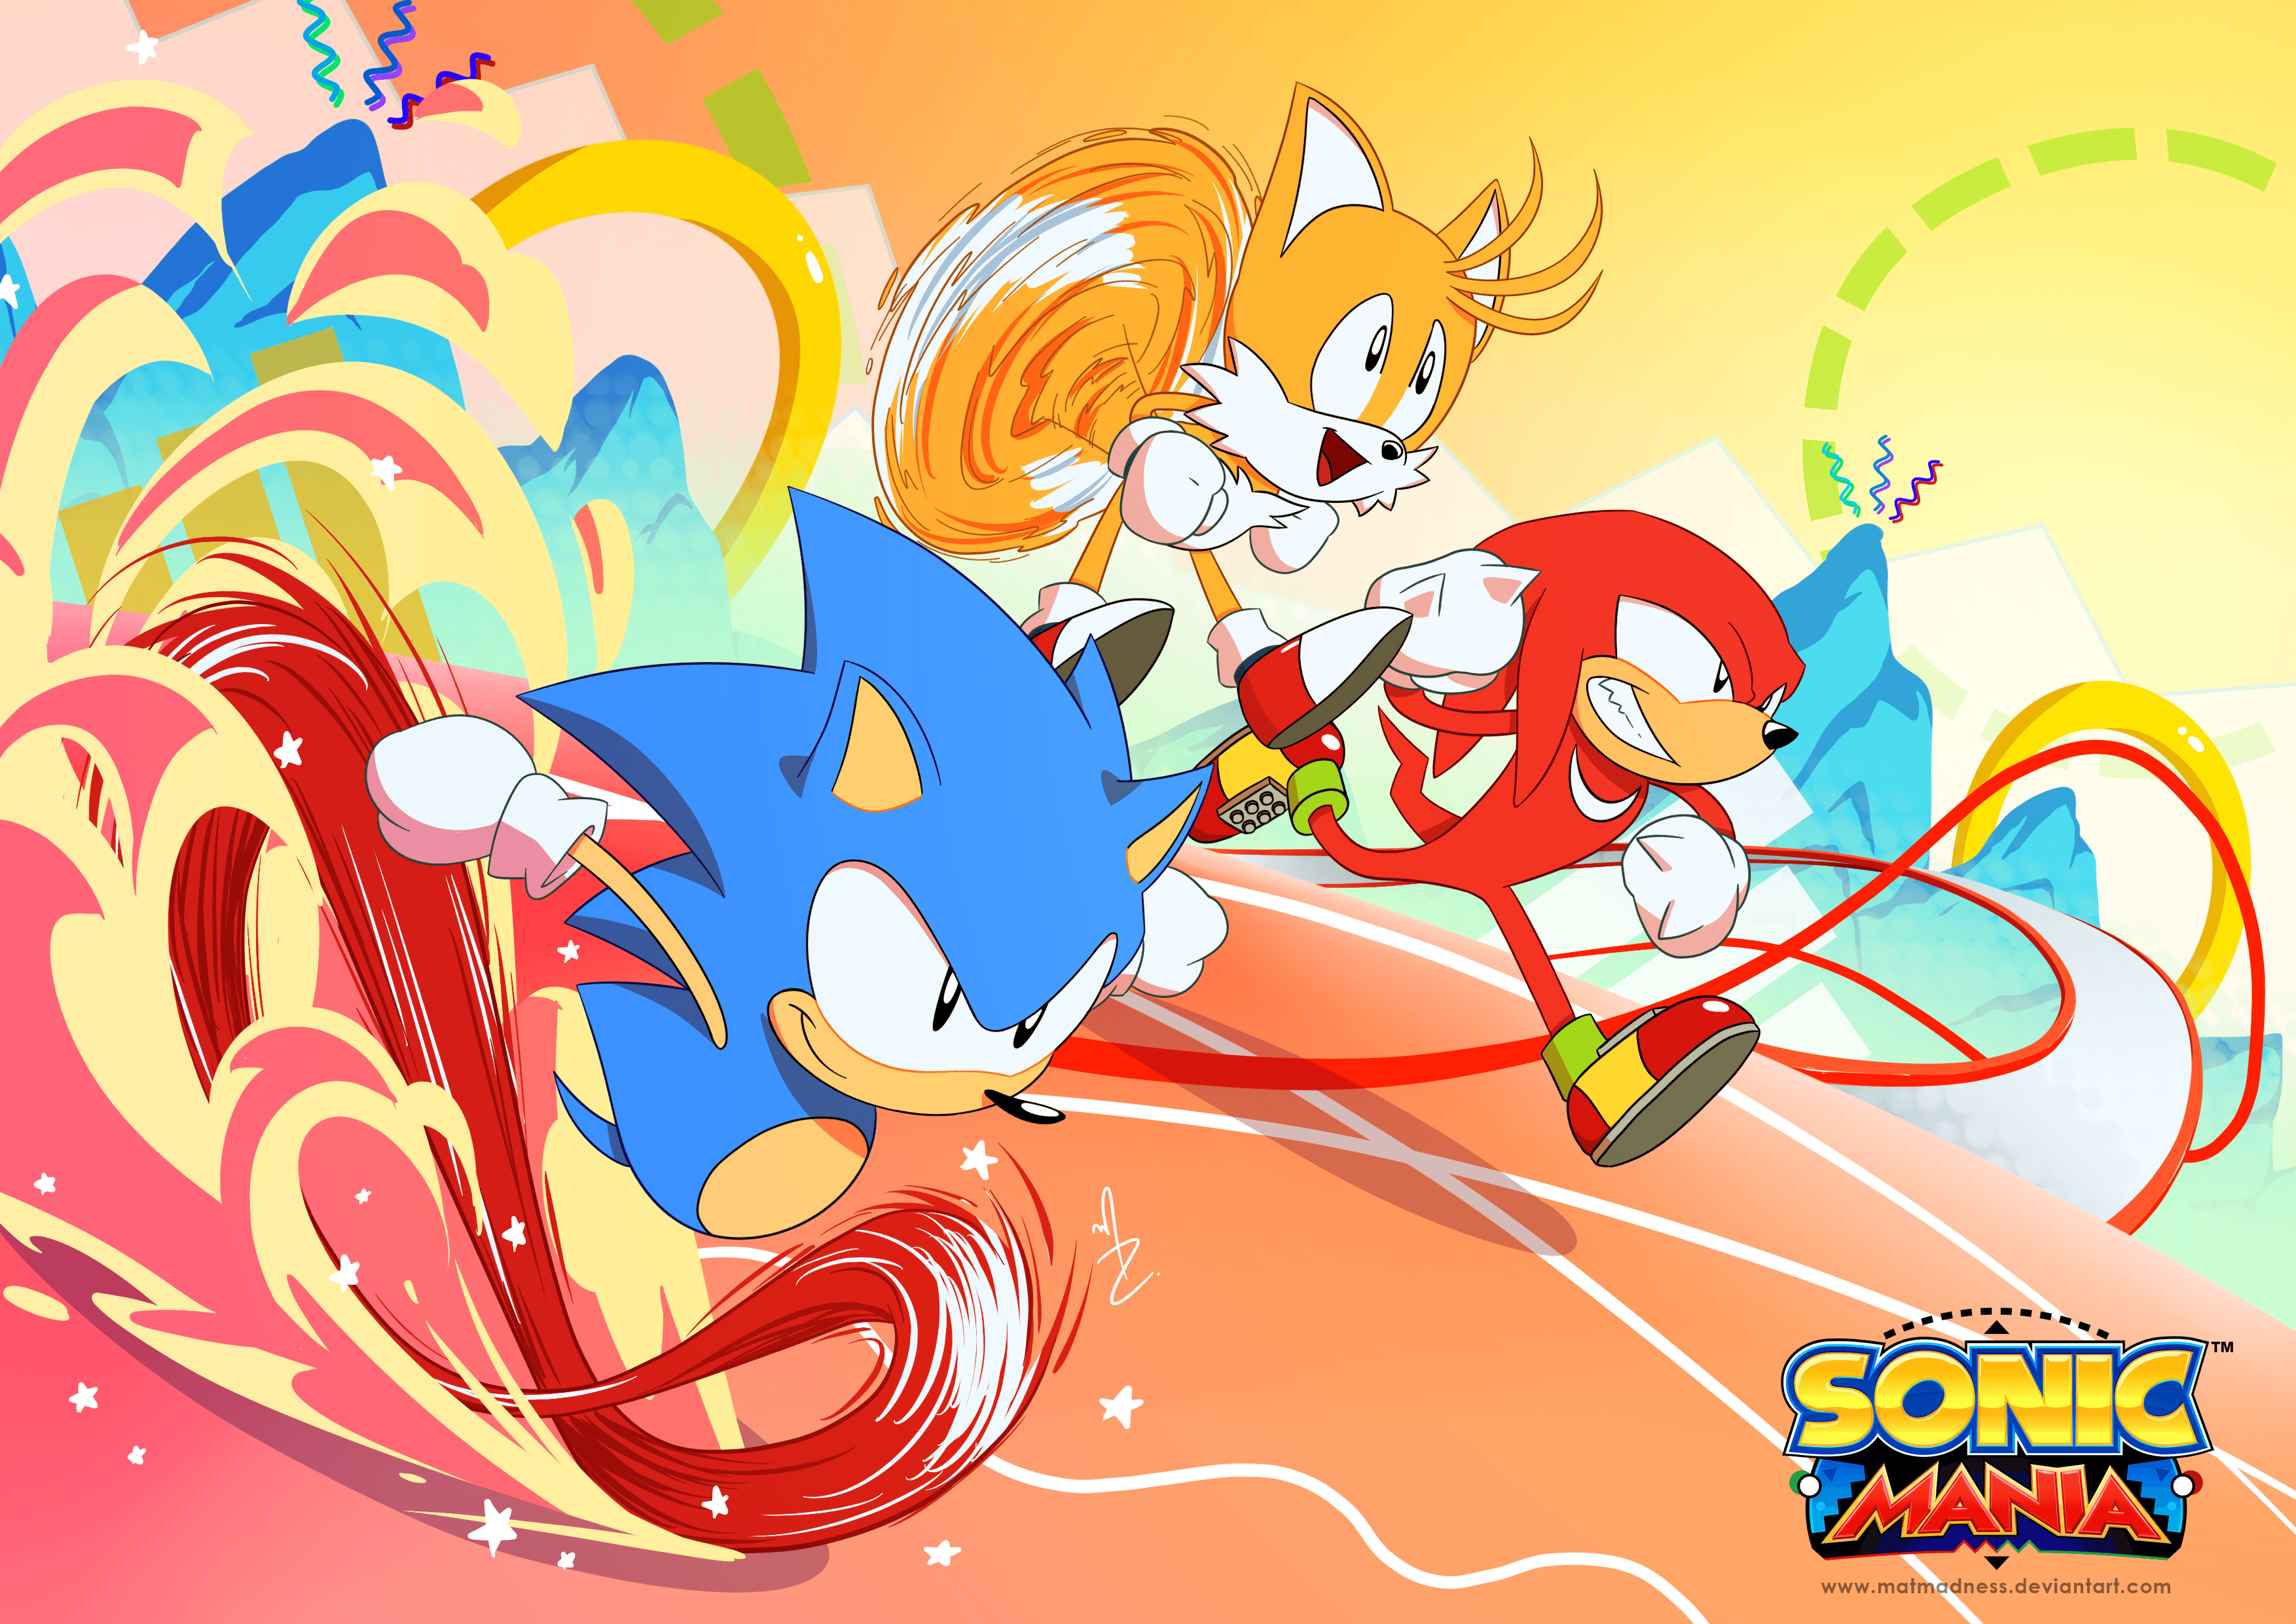 Sonic Sonic The Hedgehog Sonic Mania Sonic Mania Adventures Tails Character Knuckles Video Game Art  3507x2480